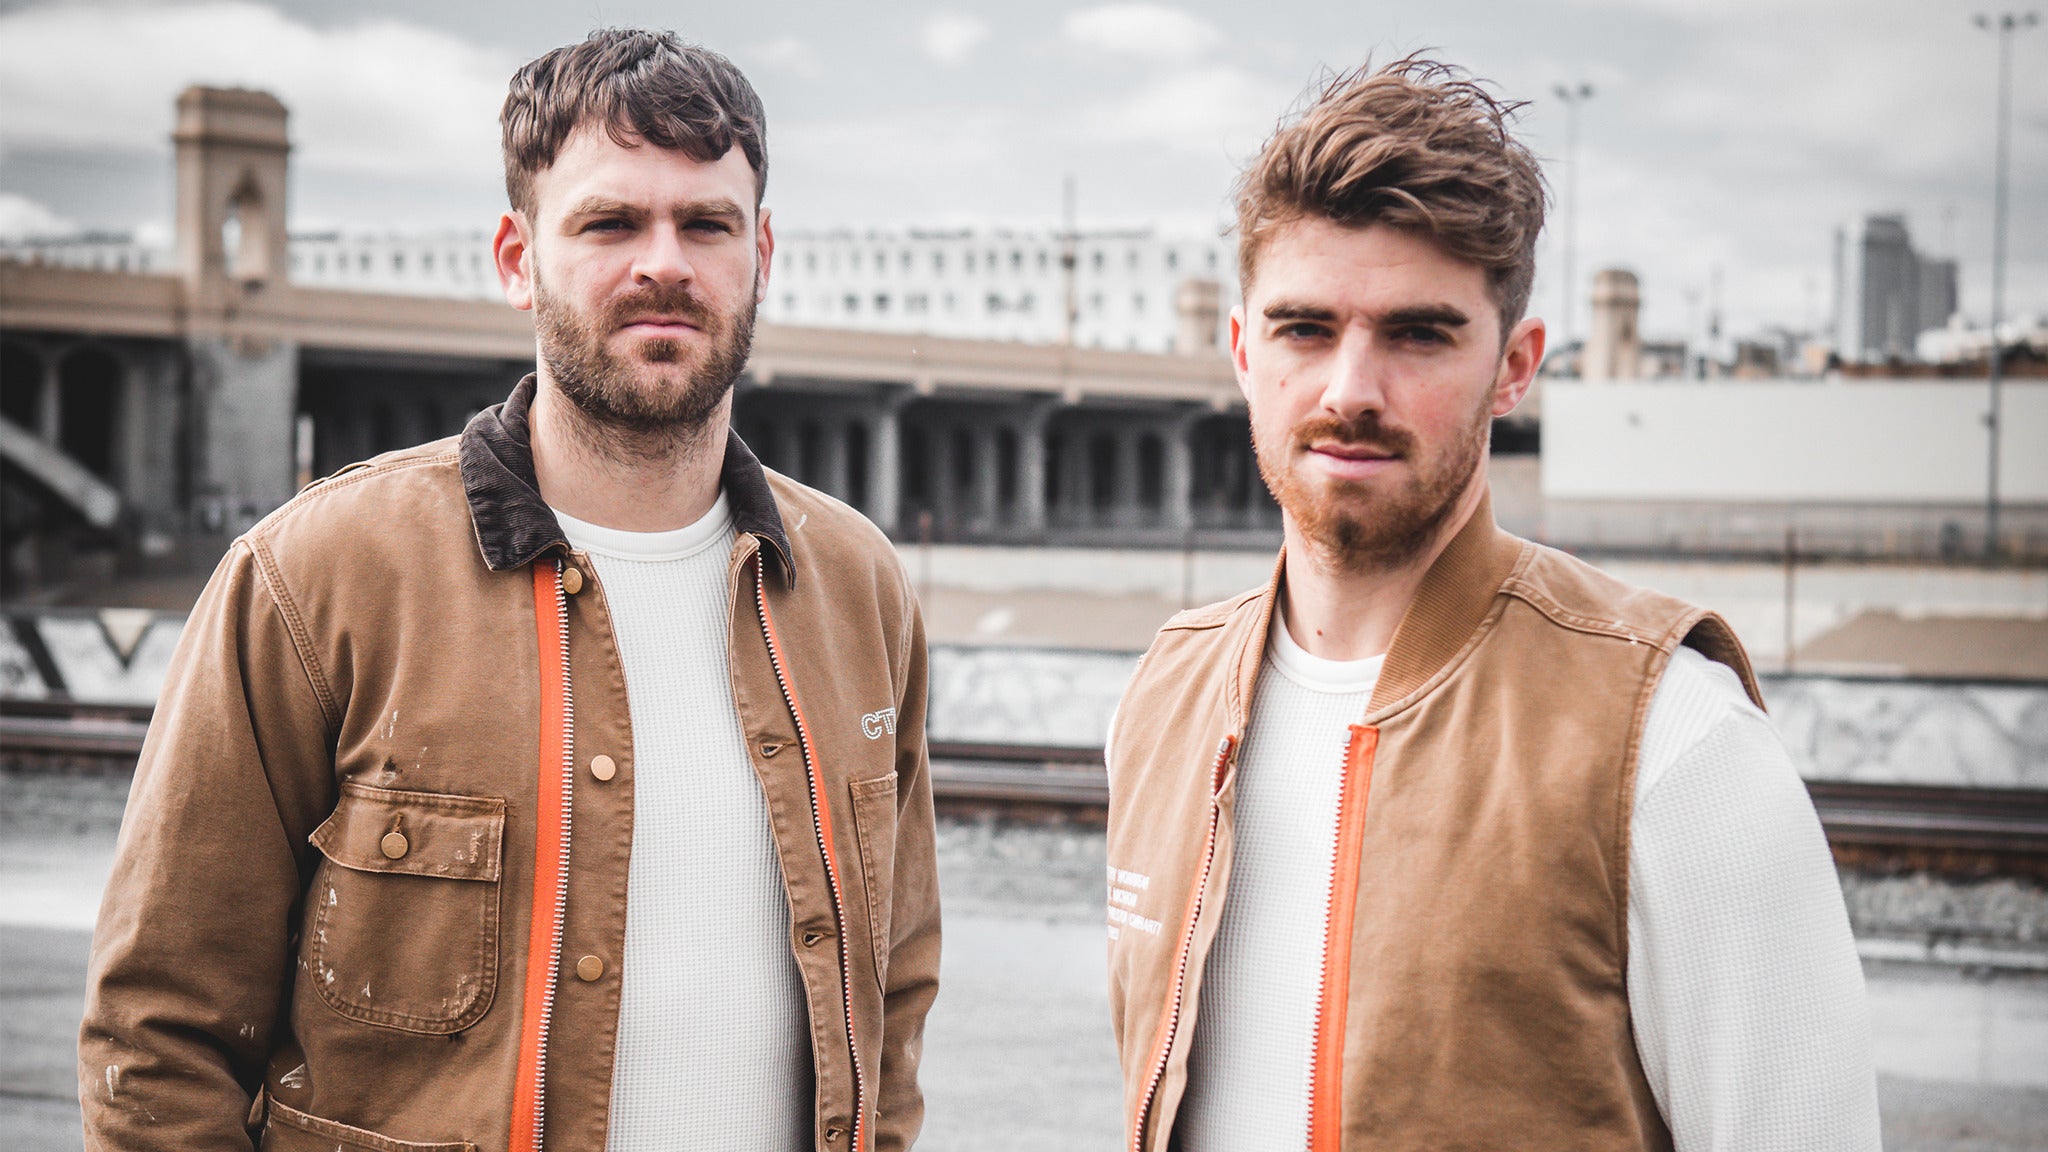 The Chainsmokers in Detroit promo photo for The Chainsmokers presale offer code